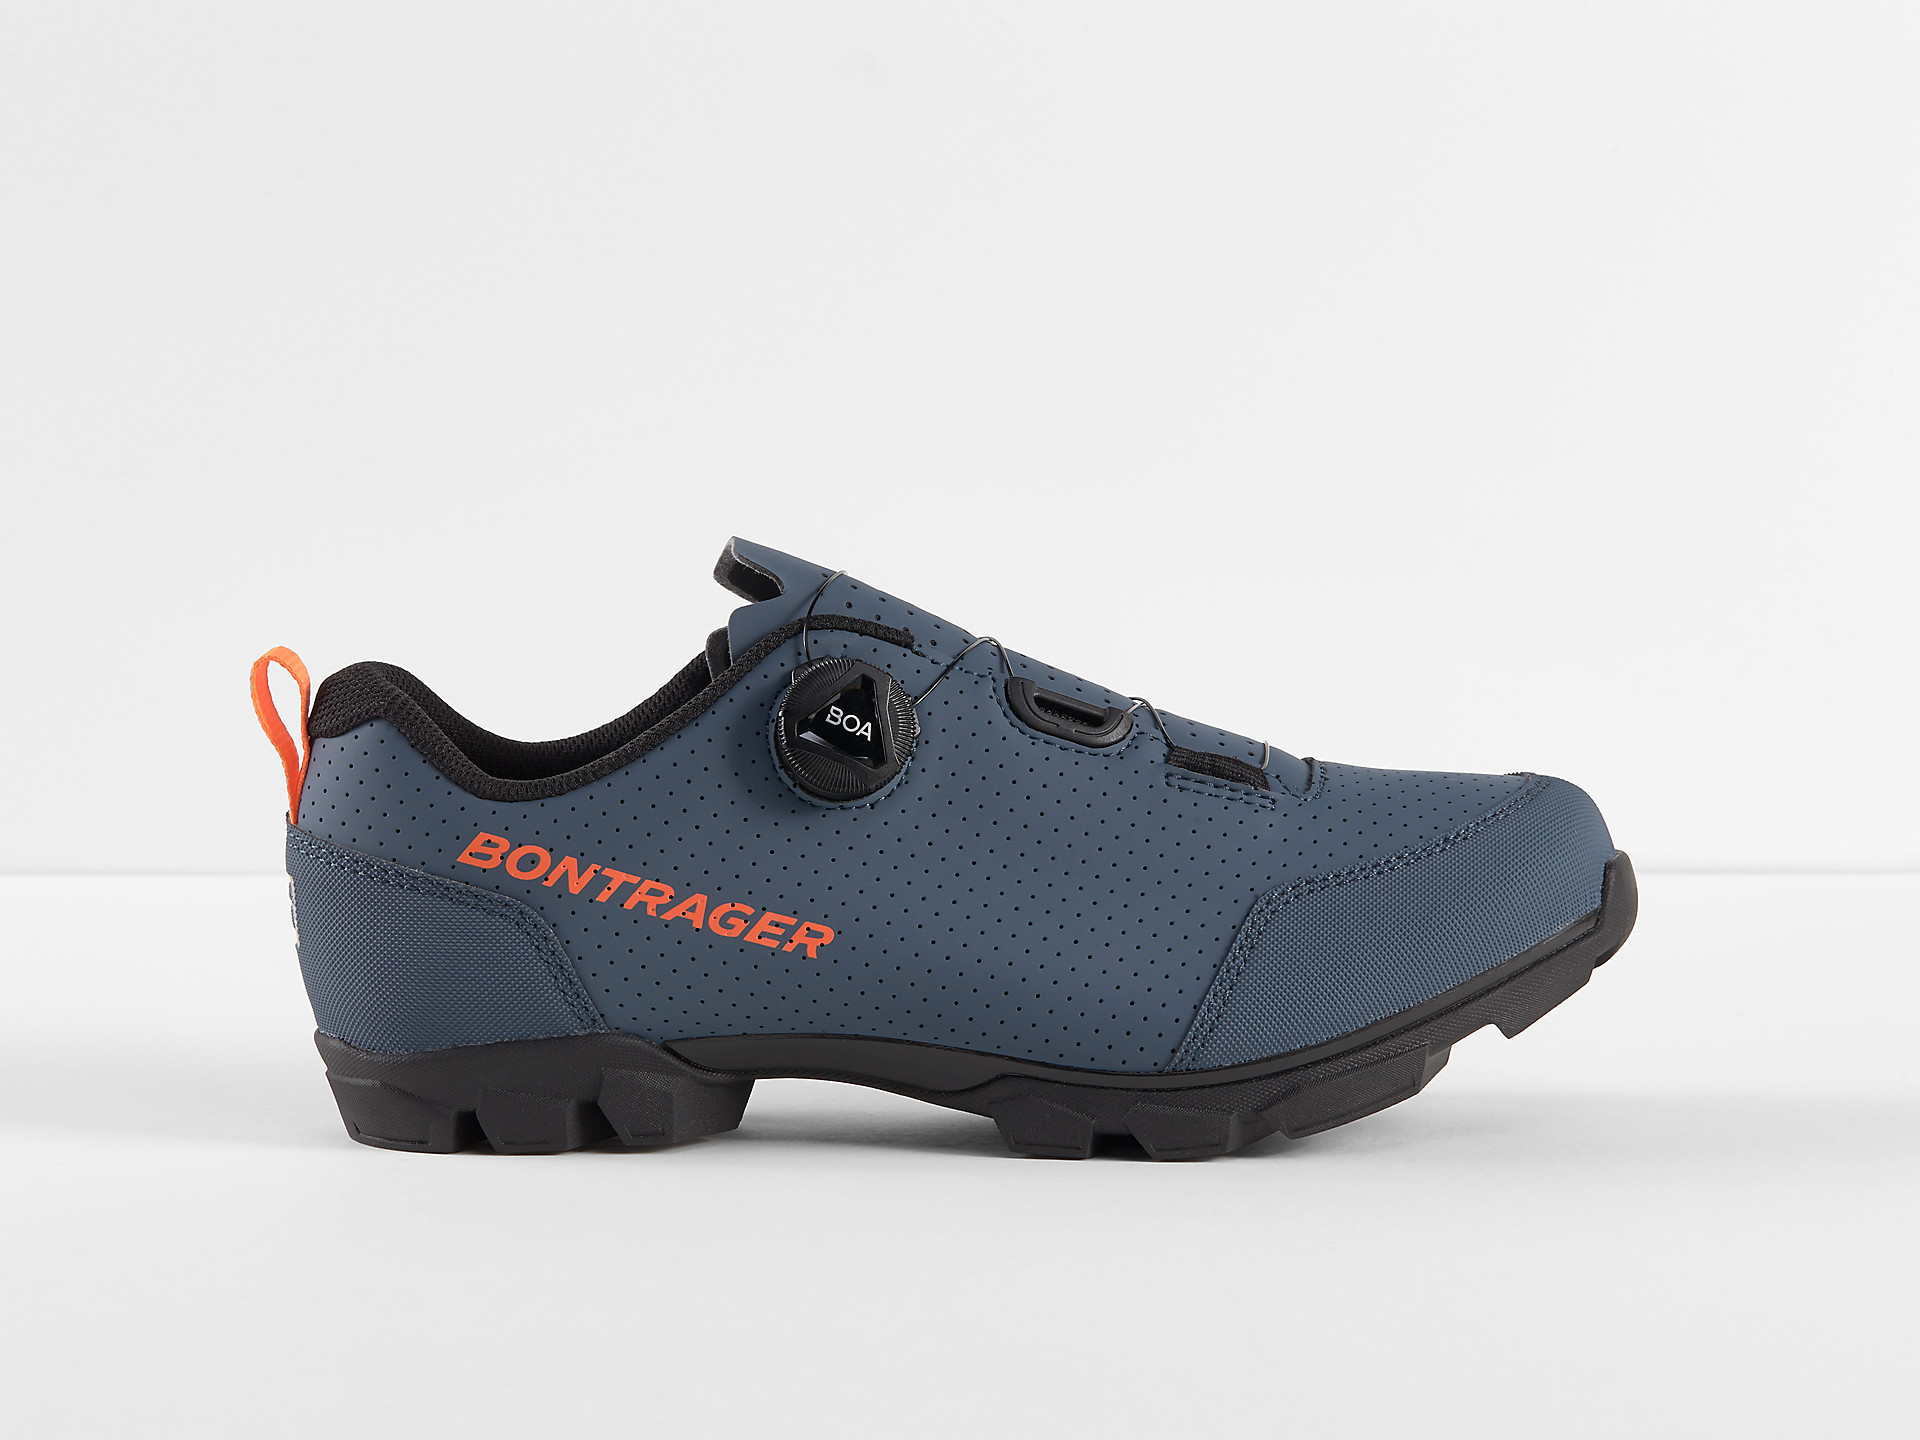 <a href="https://cycles-clement.be/product/bont-chaussures-evoke-41-black/">BONT CHAUSSURES EVOKE 41 BLACK</a>